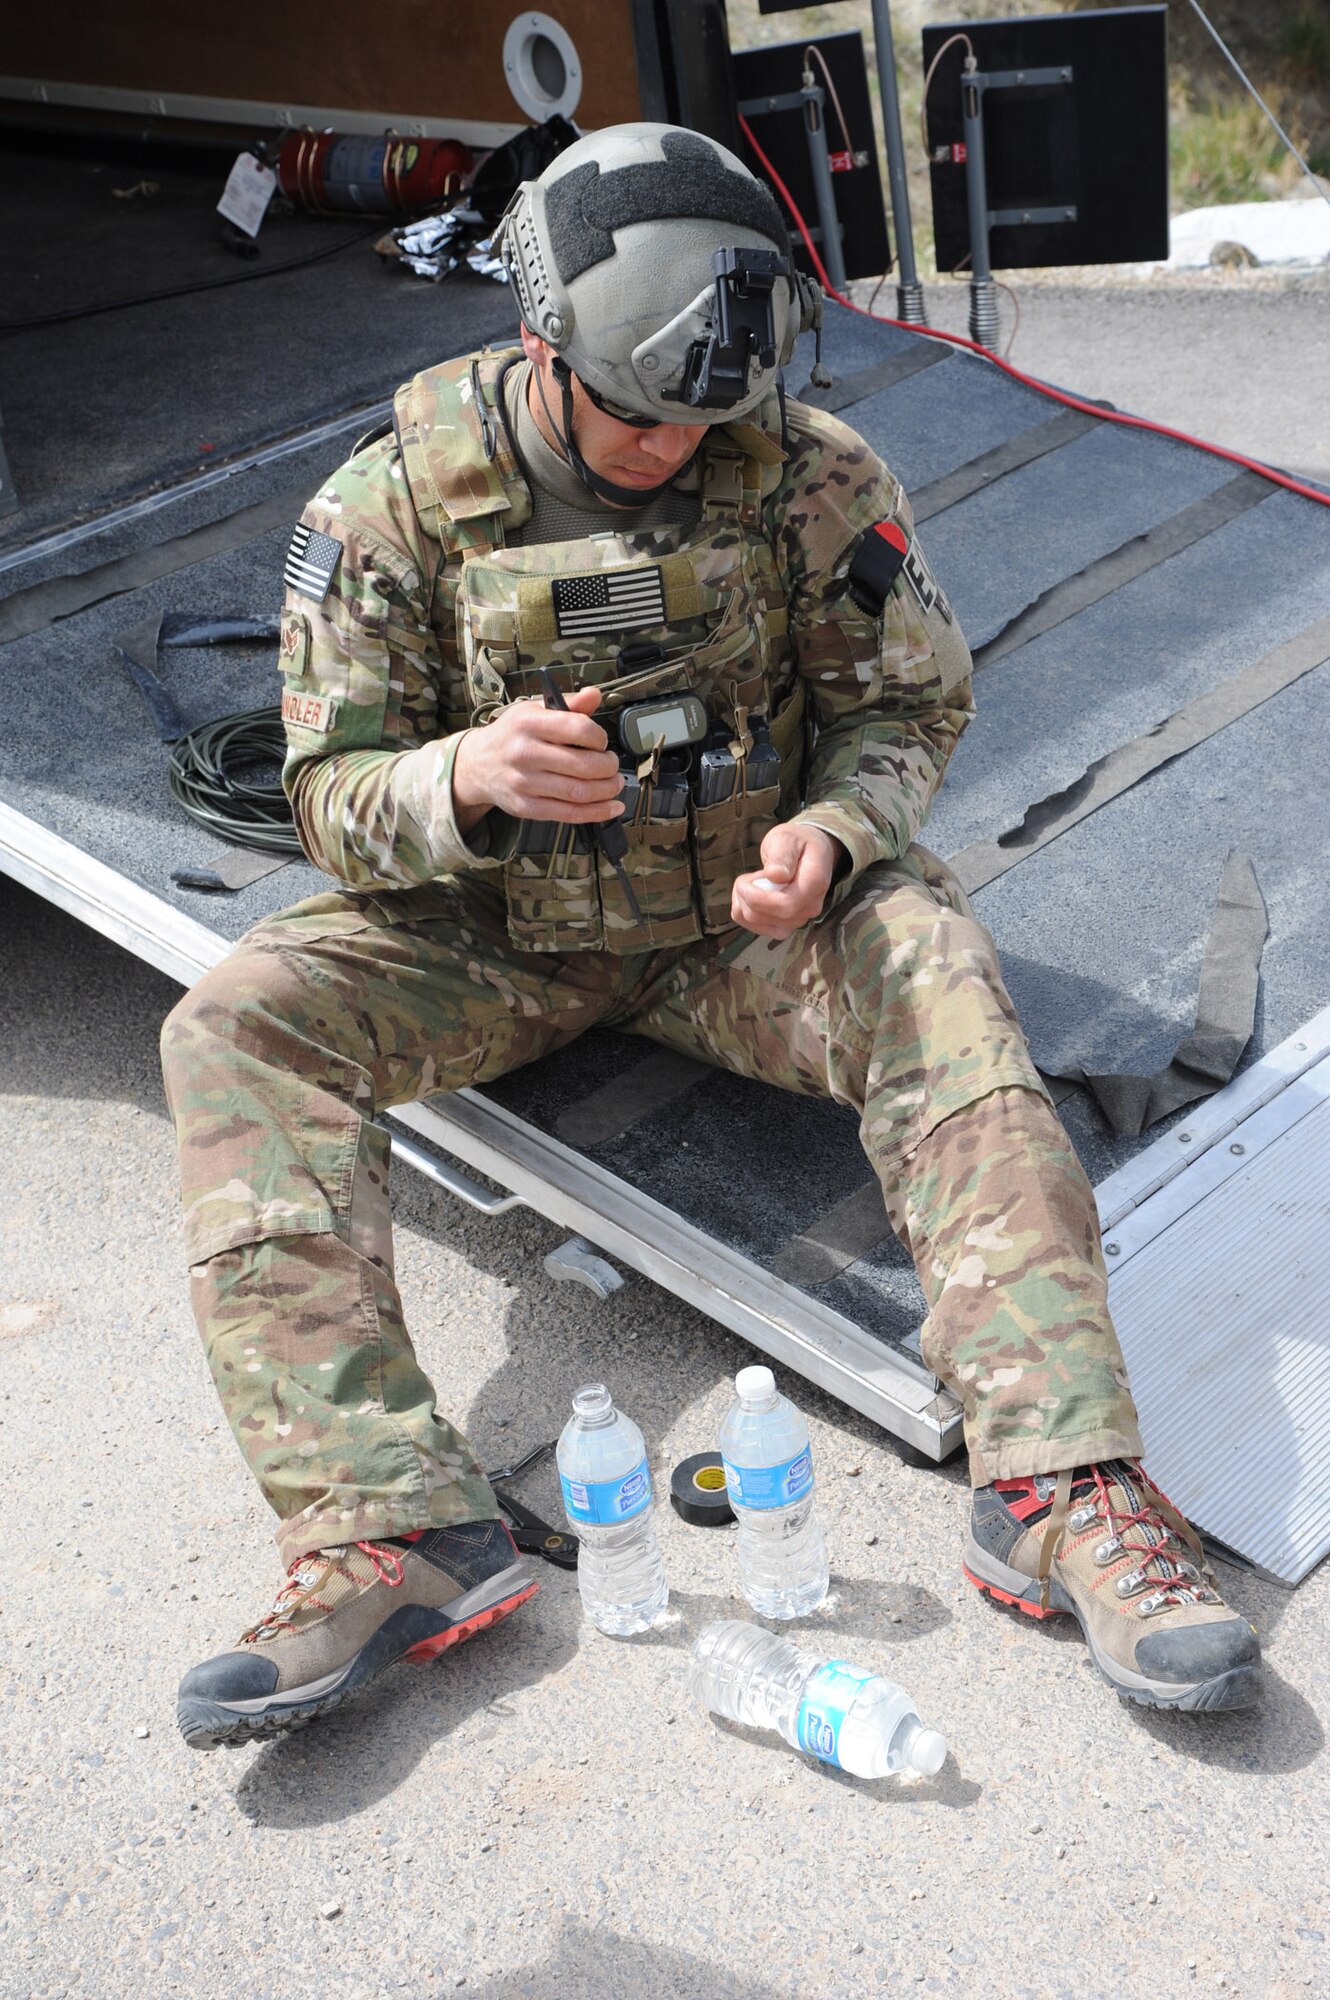 Senior Airman Randy Shandler, 341st Civil Engineer Squadron Explosive Ordnance Disposal technician, prepares an explosive water bottle charge to defeat an improvised explosive device.  Currently, Malmstrom Air Force Base has 17 personnel assigned to the 341st CES EOD team, with several of those overseas doing what they were training for during this exercise. (U.S. Air Force photo/ Airman 1st Class Joshua Smoot)